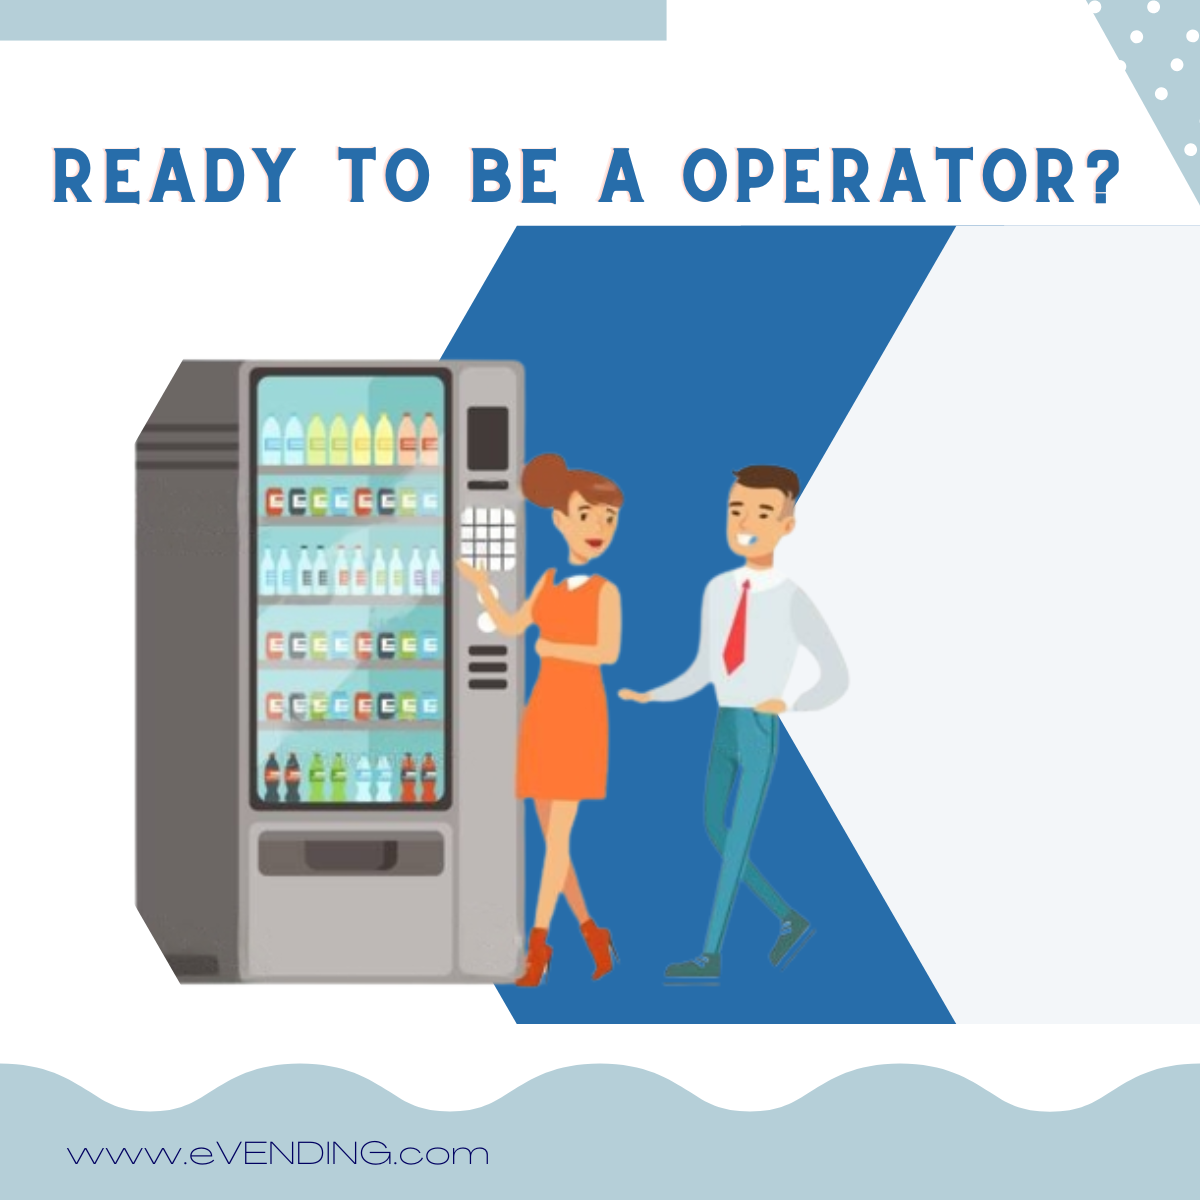 ARE YOU READY TO BECOME A VENDING OPERATOR?